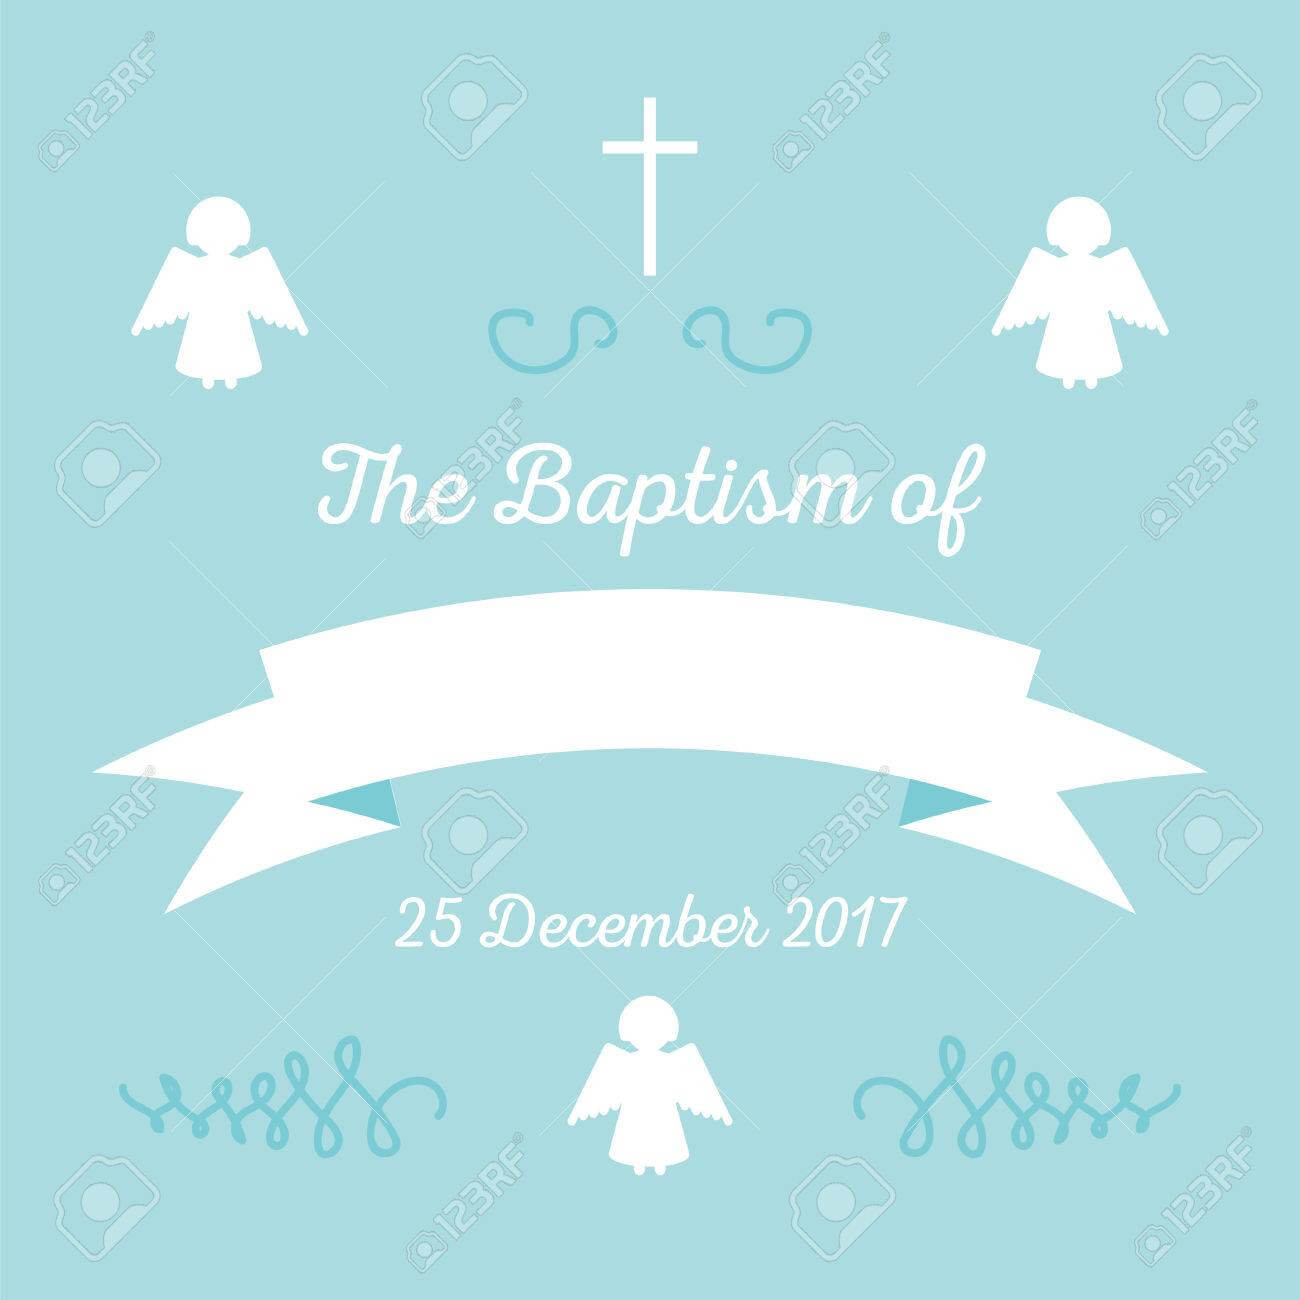 Baptism Invitation Card Template. Stock Vector Illustration For.. Intended For Free Christening Invitation Cards Templates